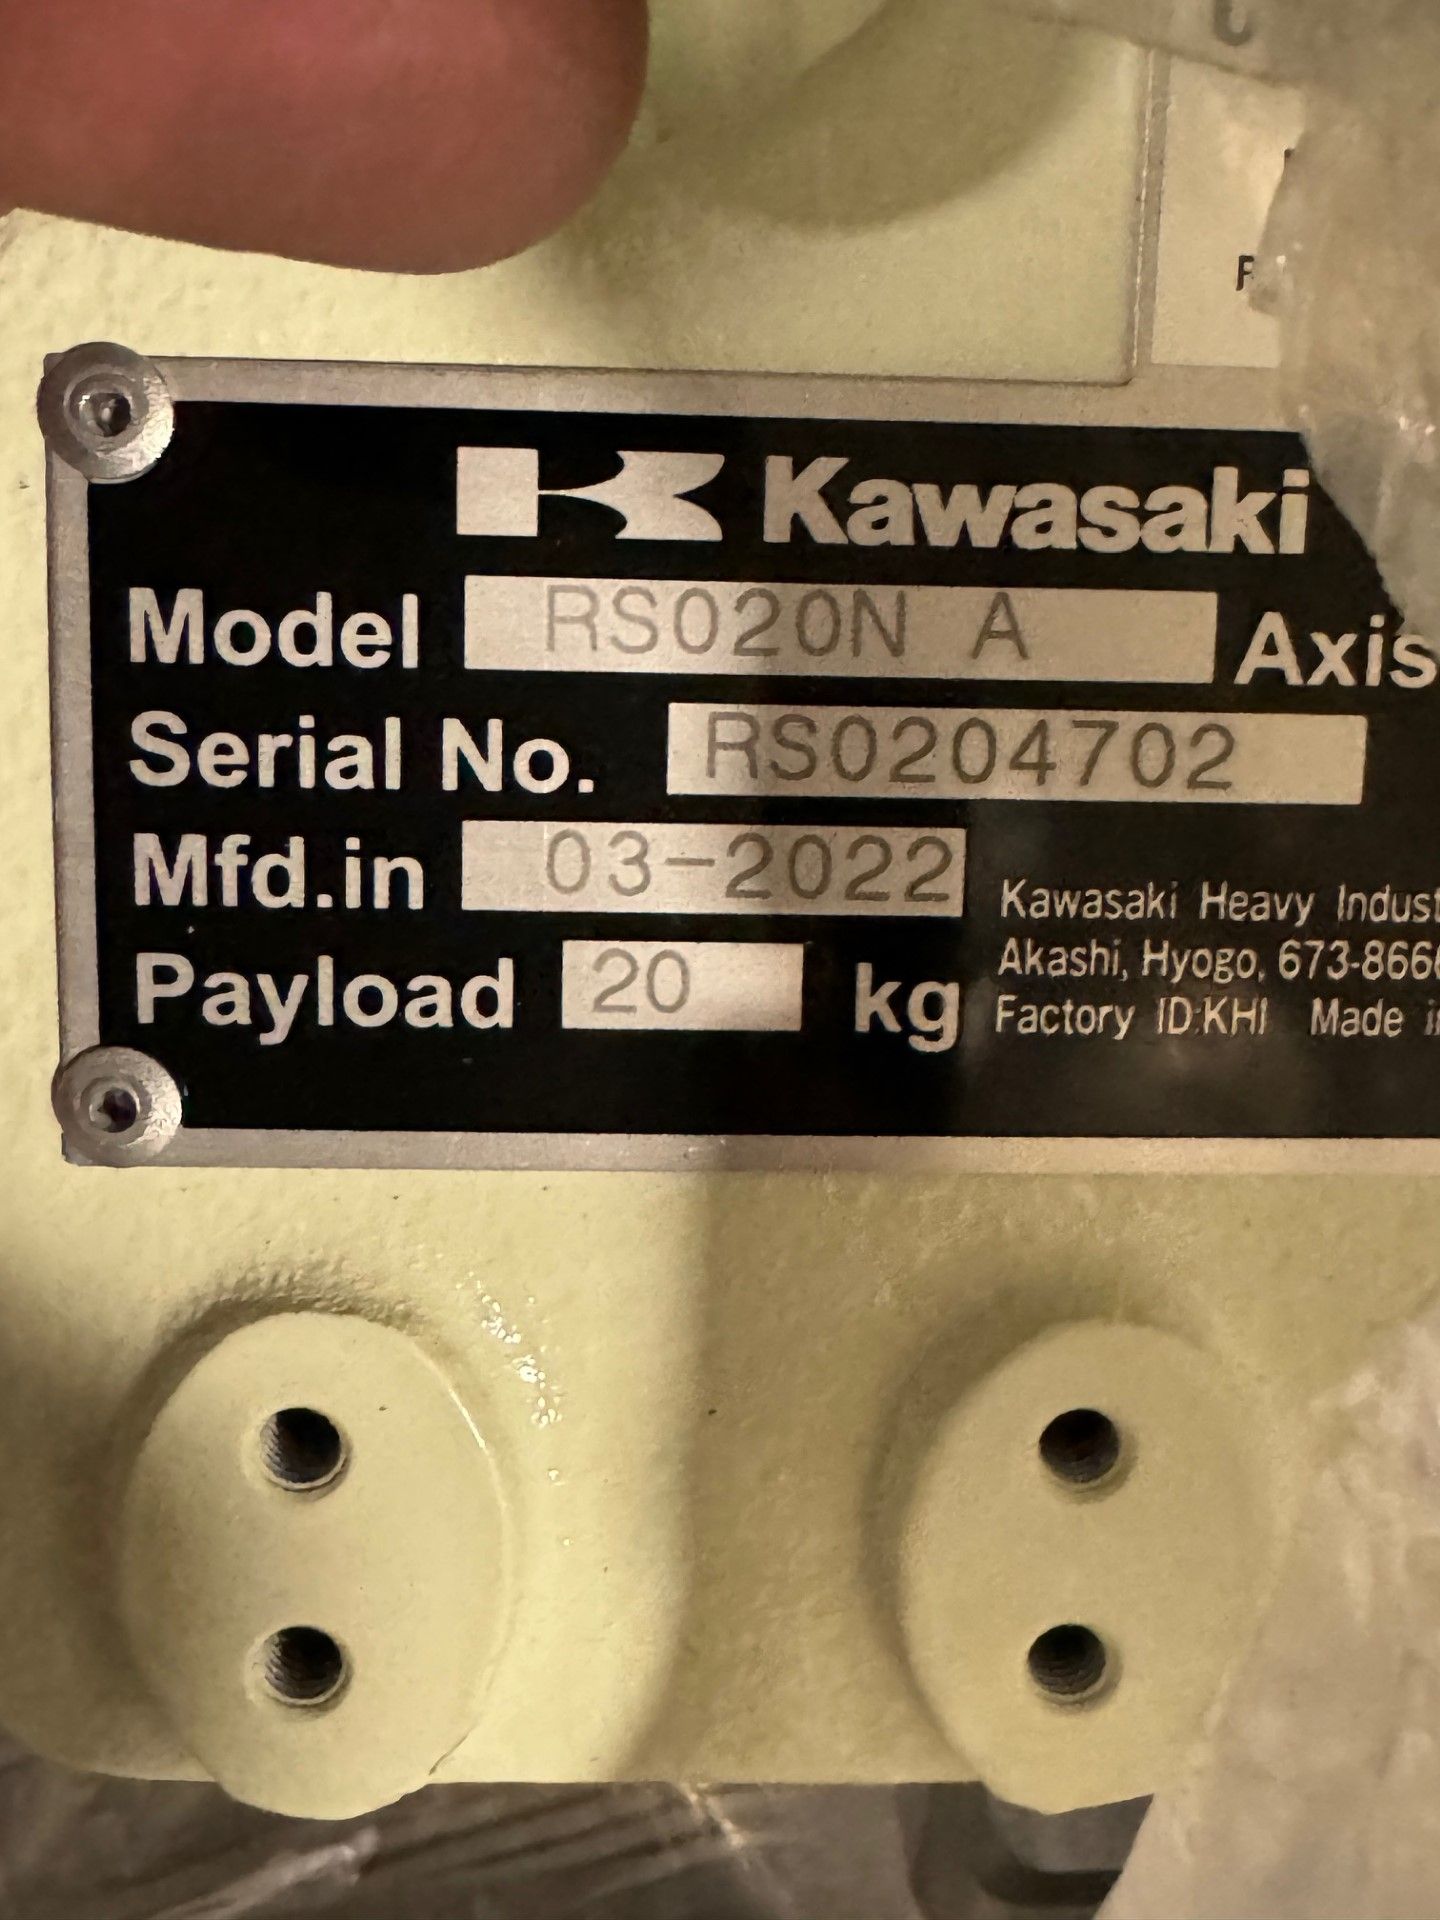 NEW KAWASAKI ROBOT MODEL RS020N, SN 4702, 20KG X 1725MM REACH WITH EO1 CONTROLS, CABLES & TEACH - Image 7 of 7